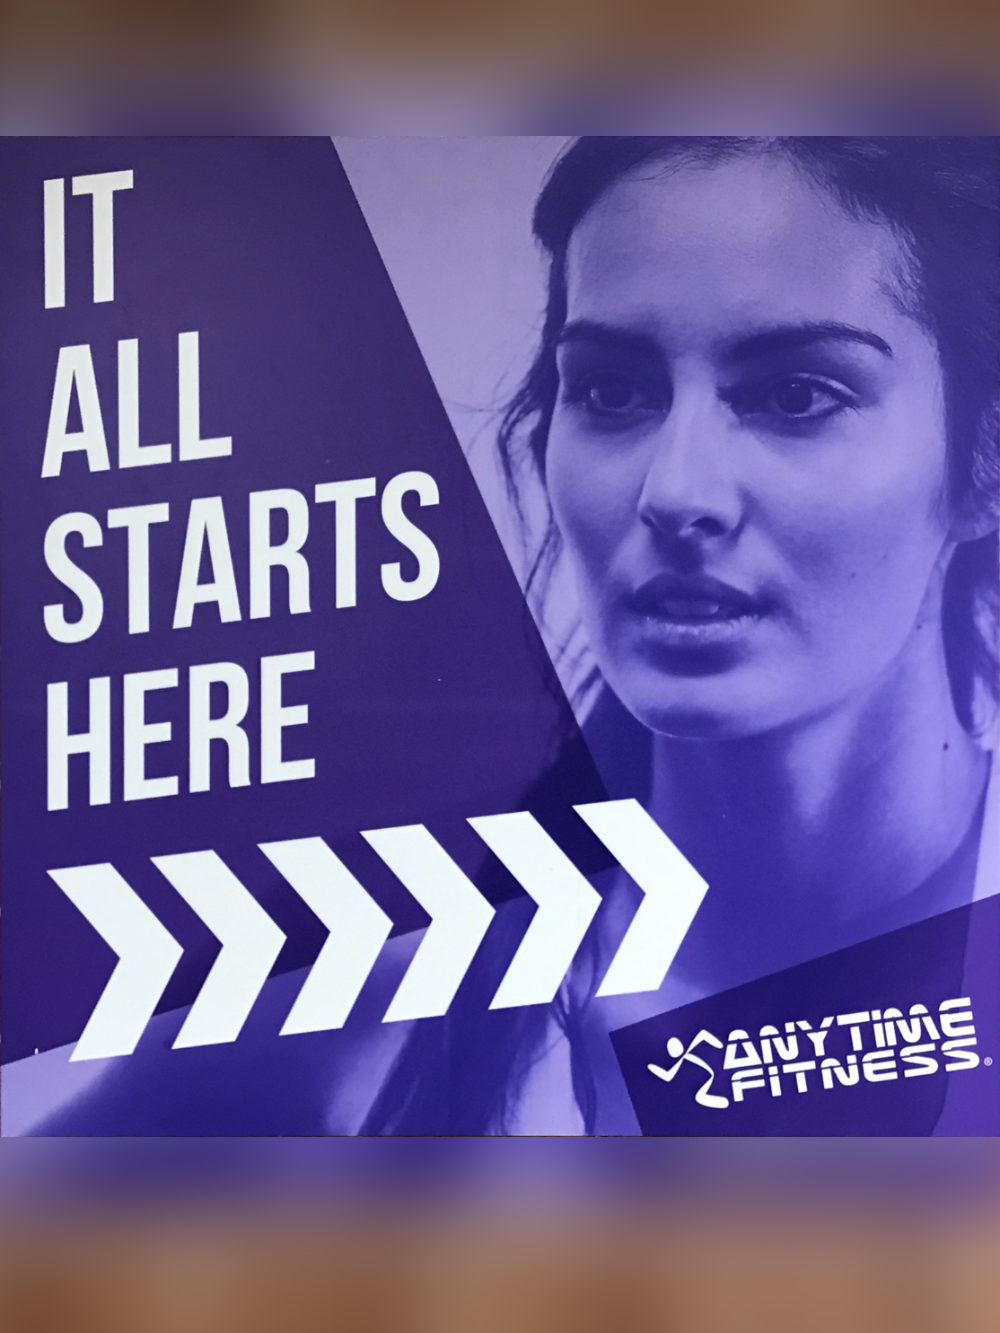 Portico Plaza Anytime Fitness